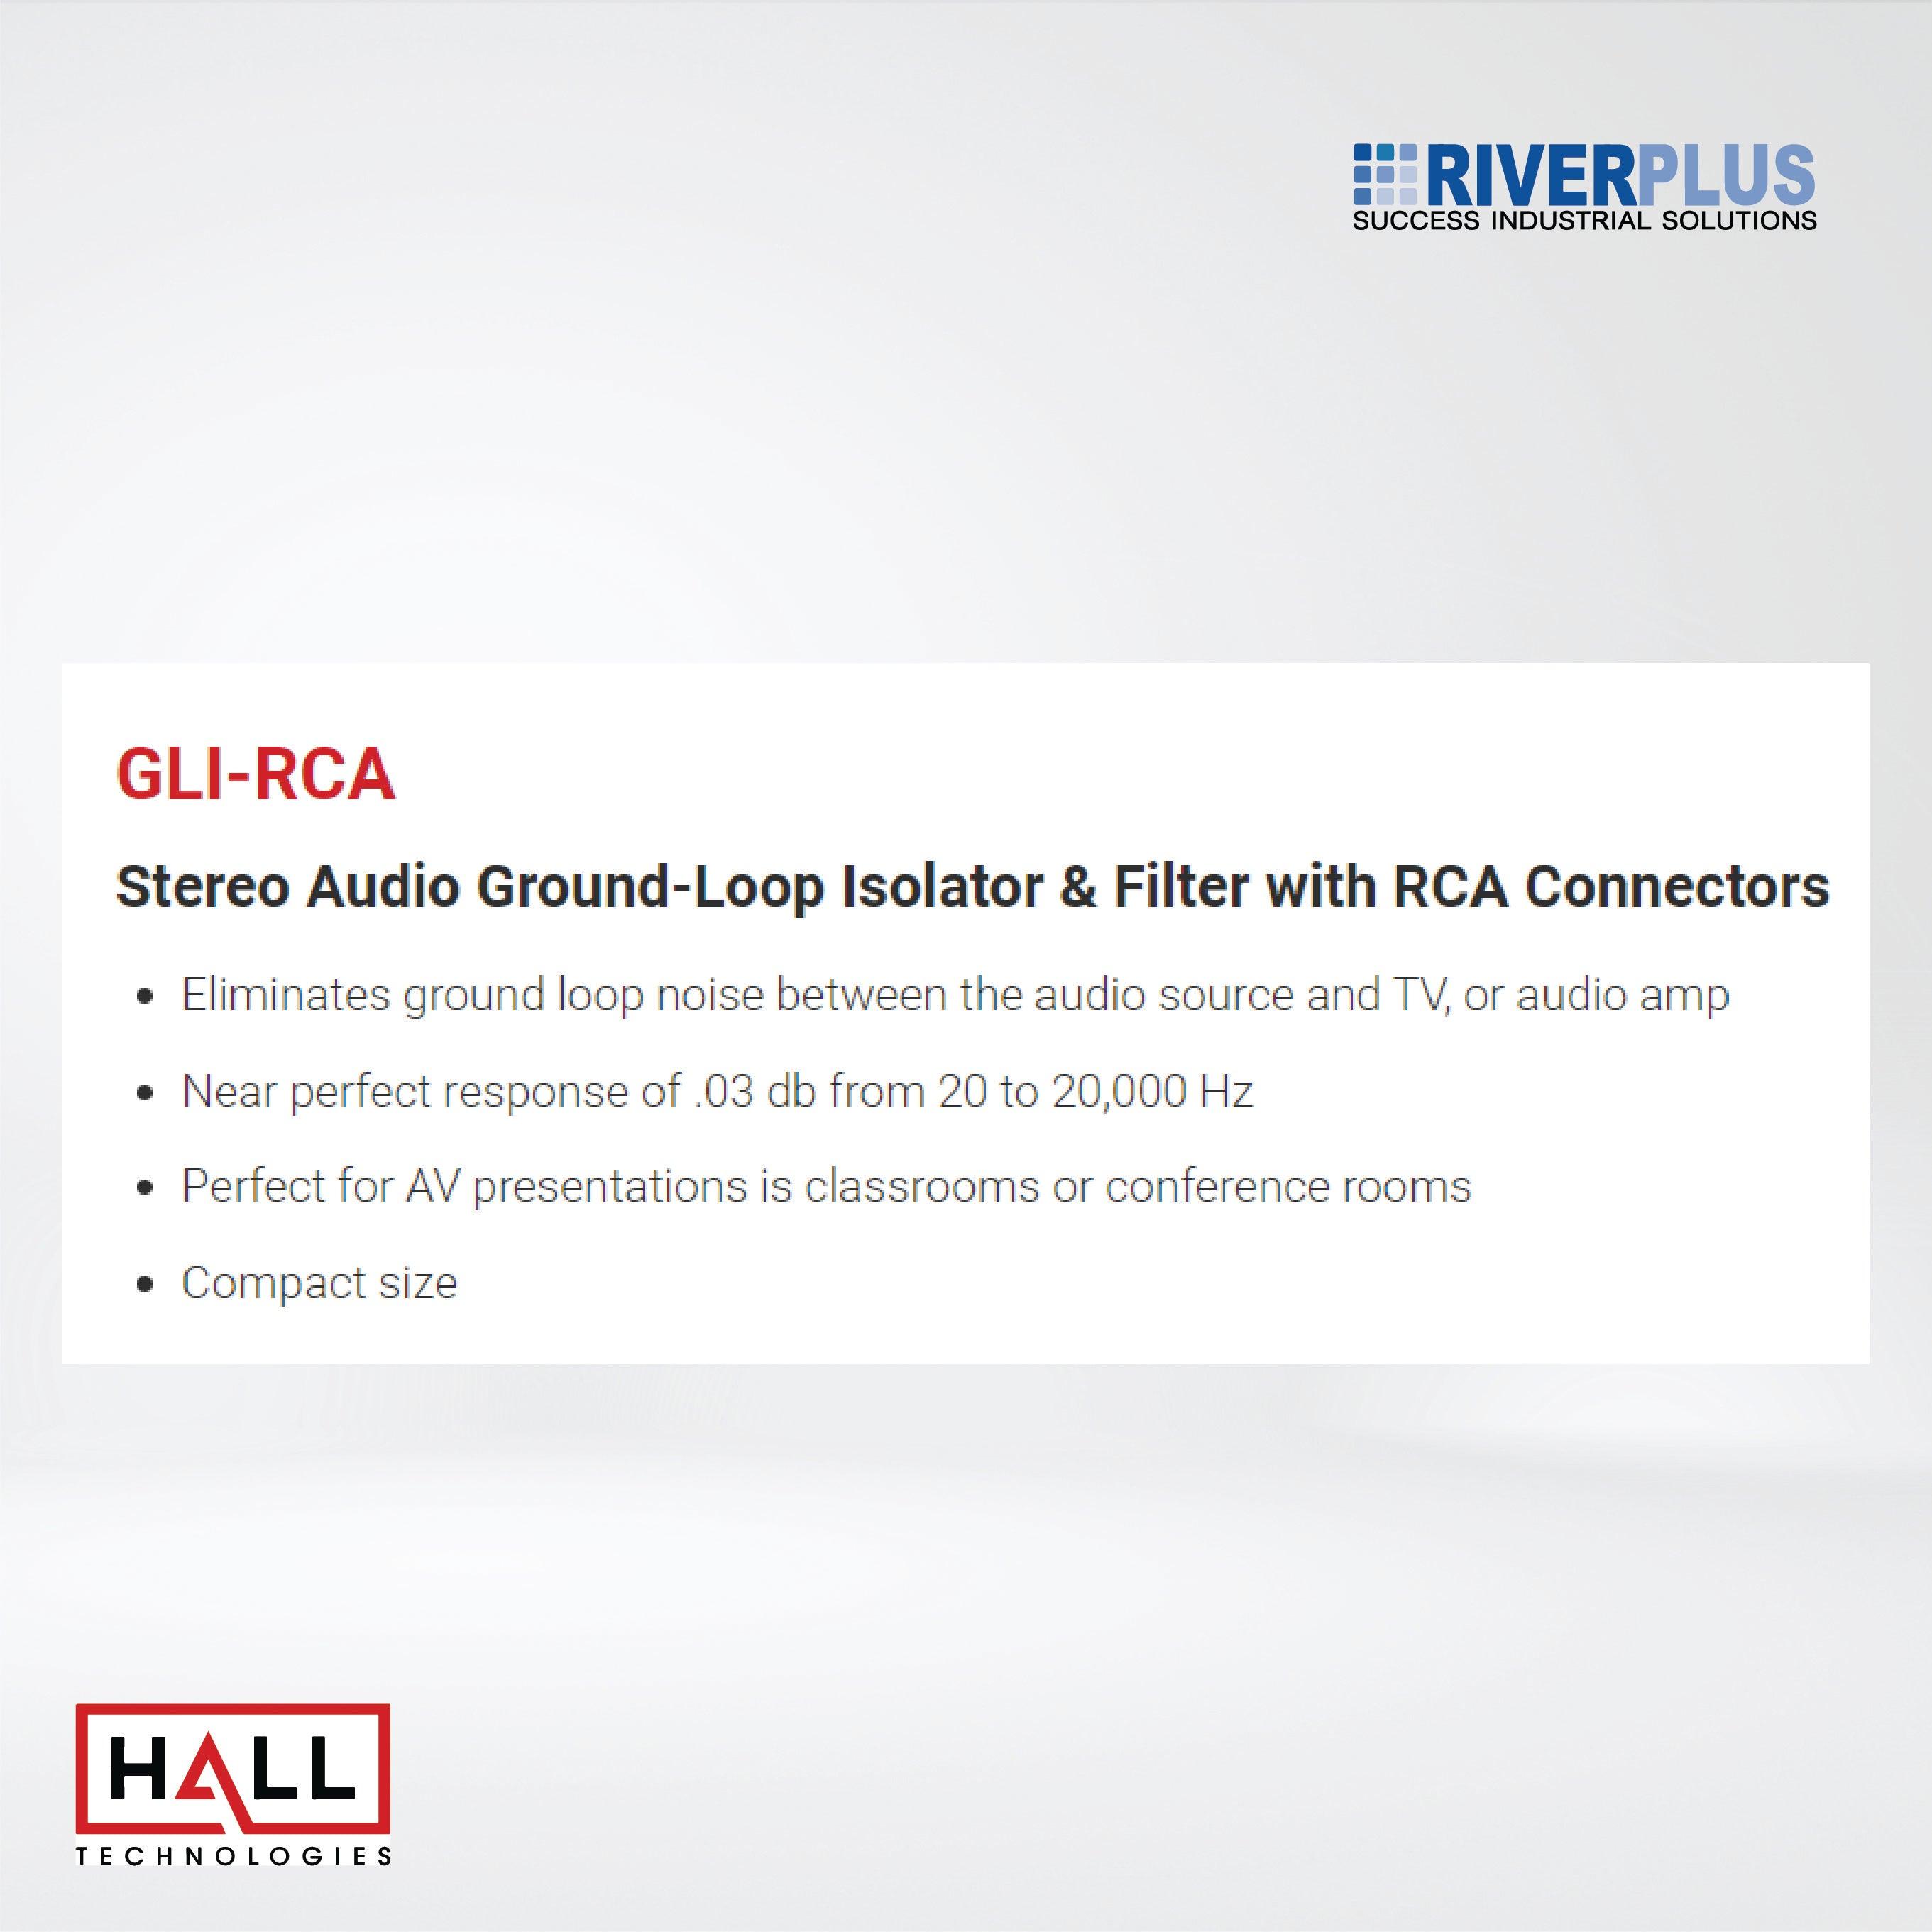 GLI-RCA Stereo Audio Ground-Loop Isolator & Filter with RCA Connectors - Riverplus